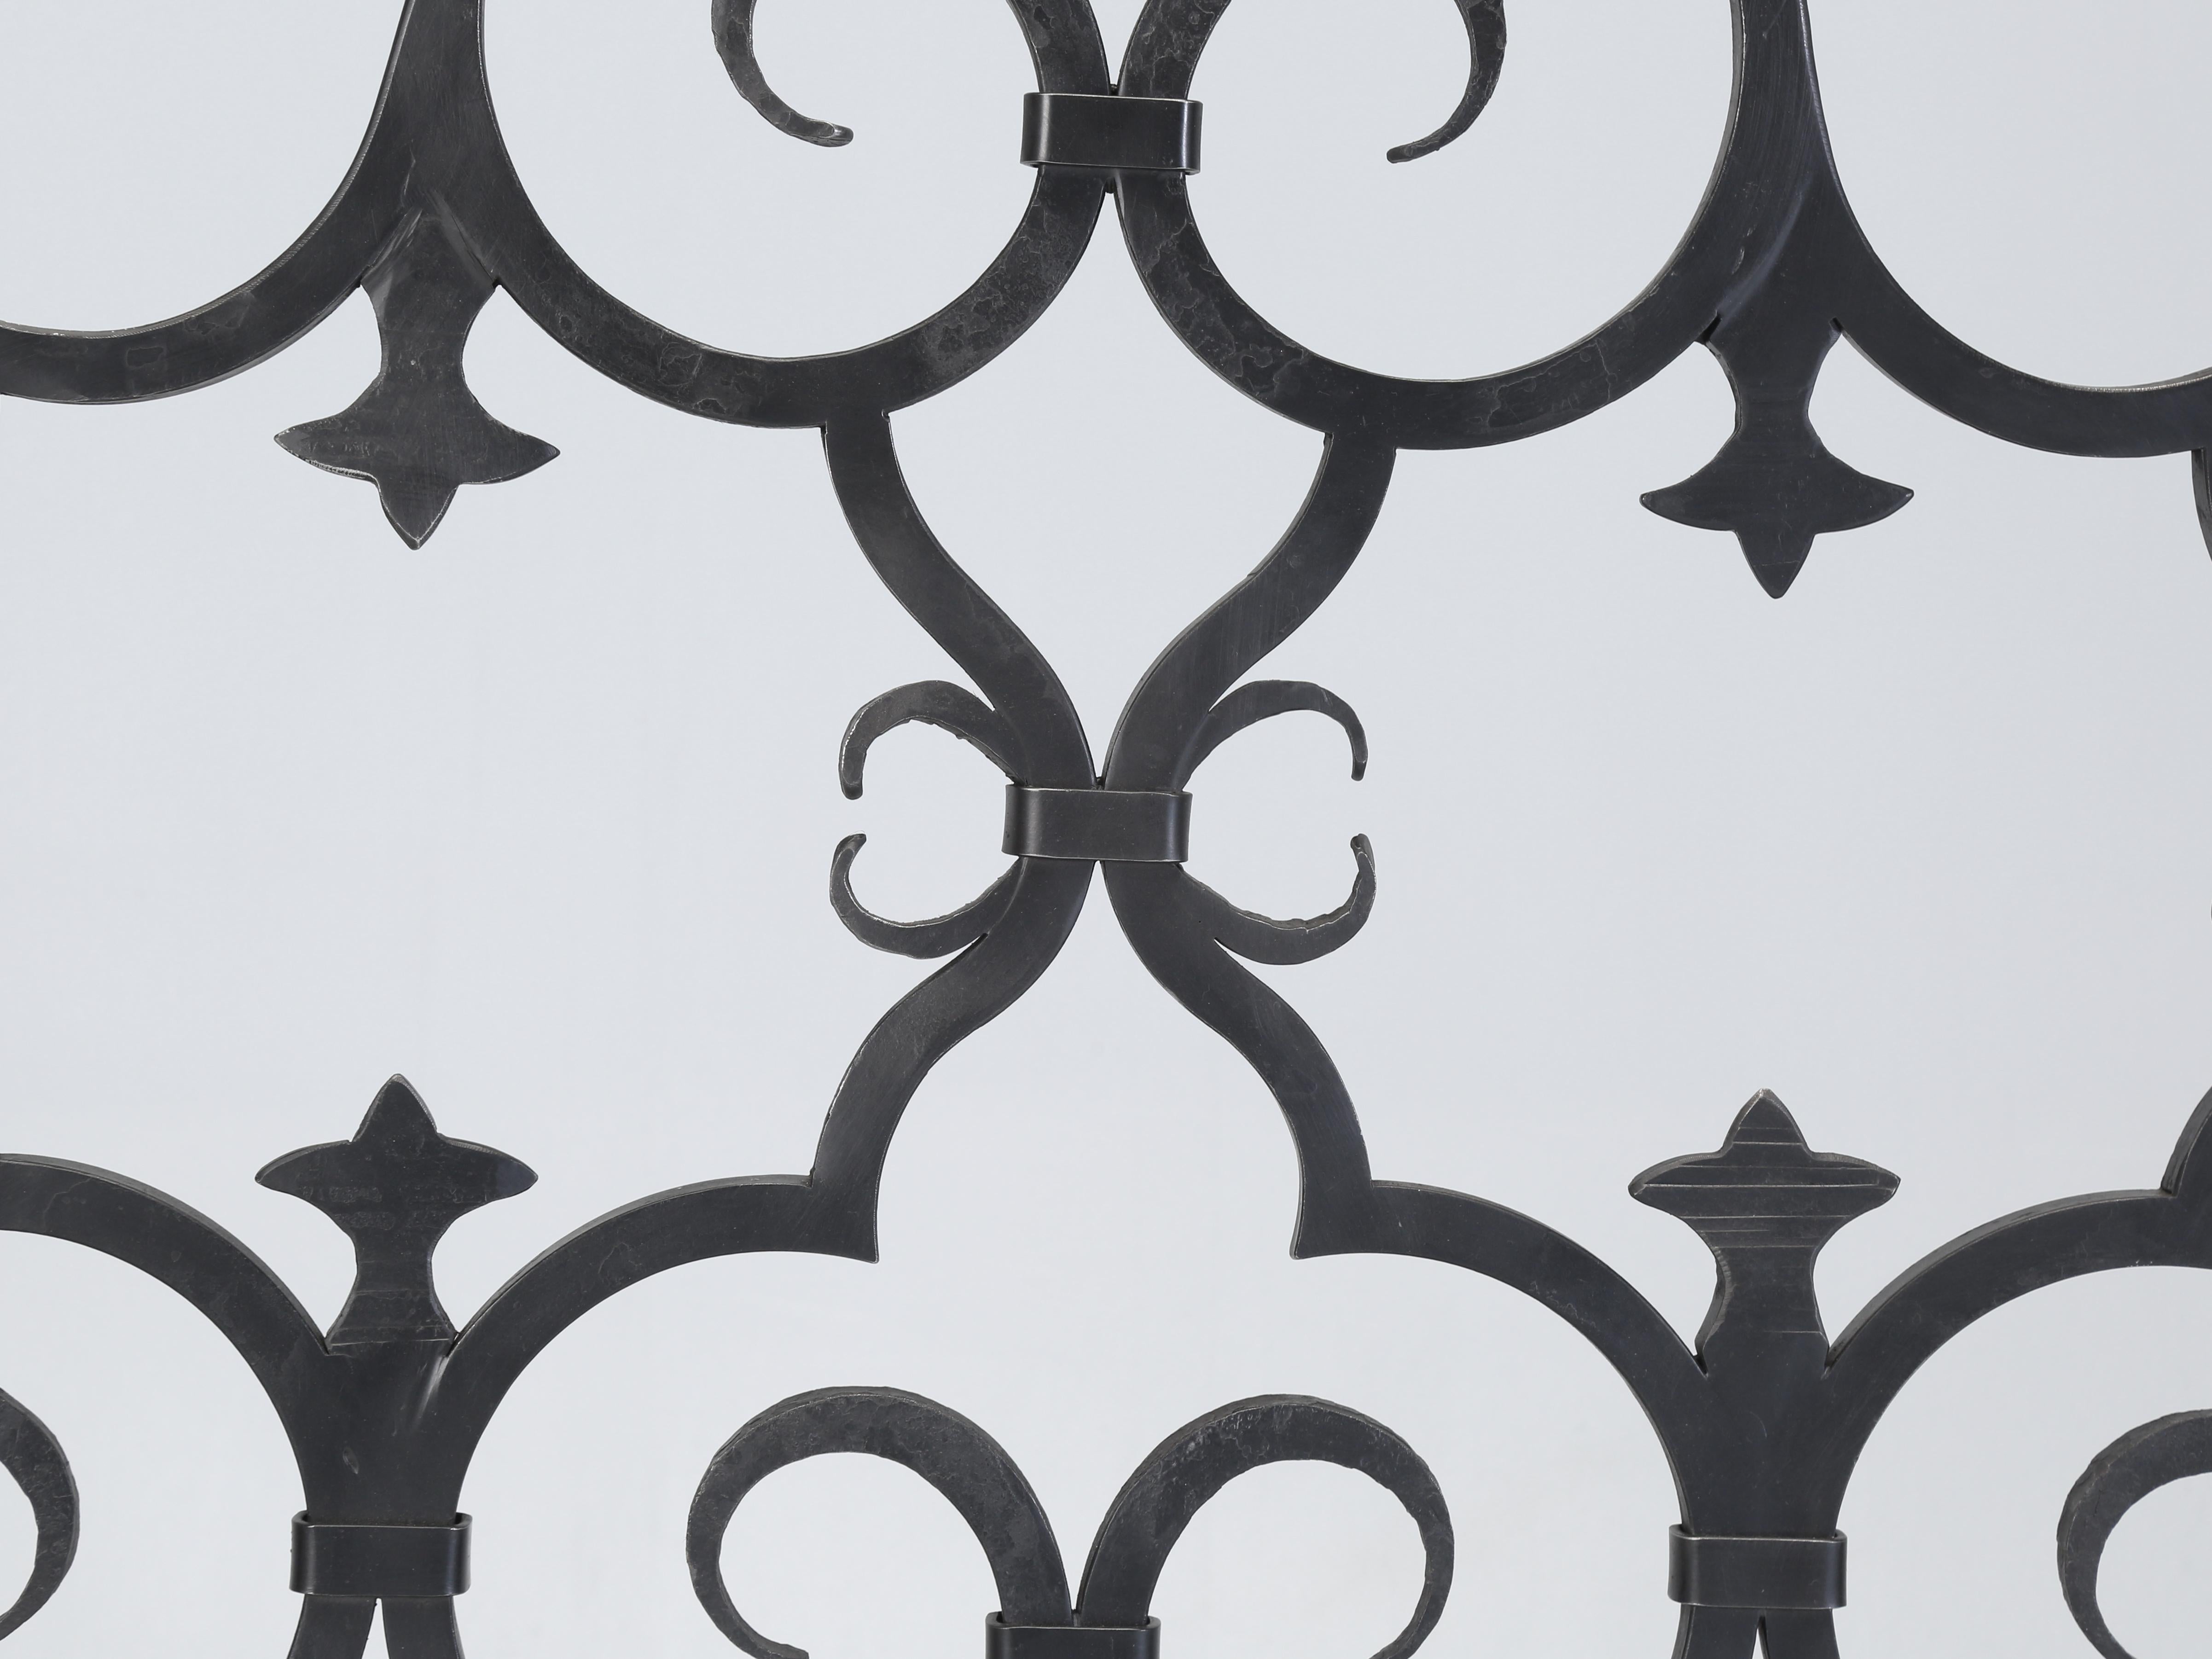 Hand-Crafted Hand-Wrought Iron Made to Order Old Plank Fireplace Screen Mediterranean Style For Sale